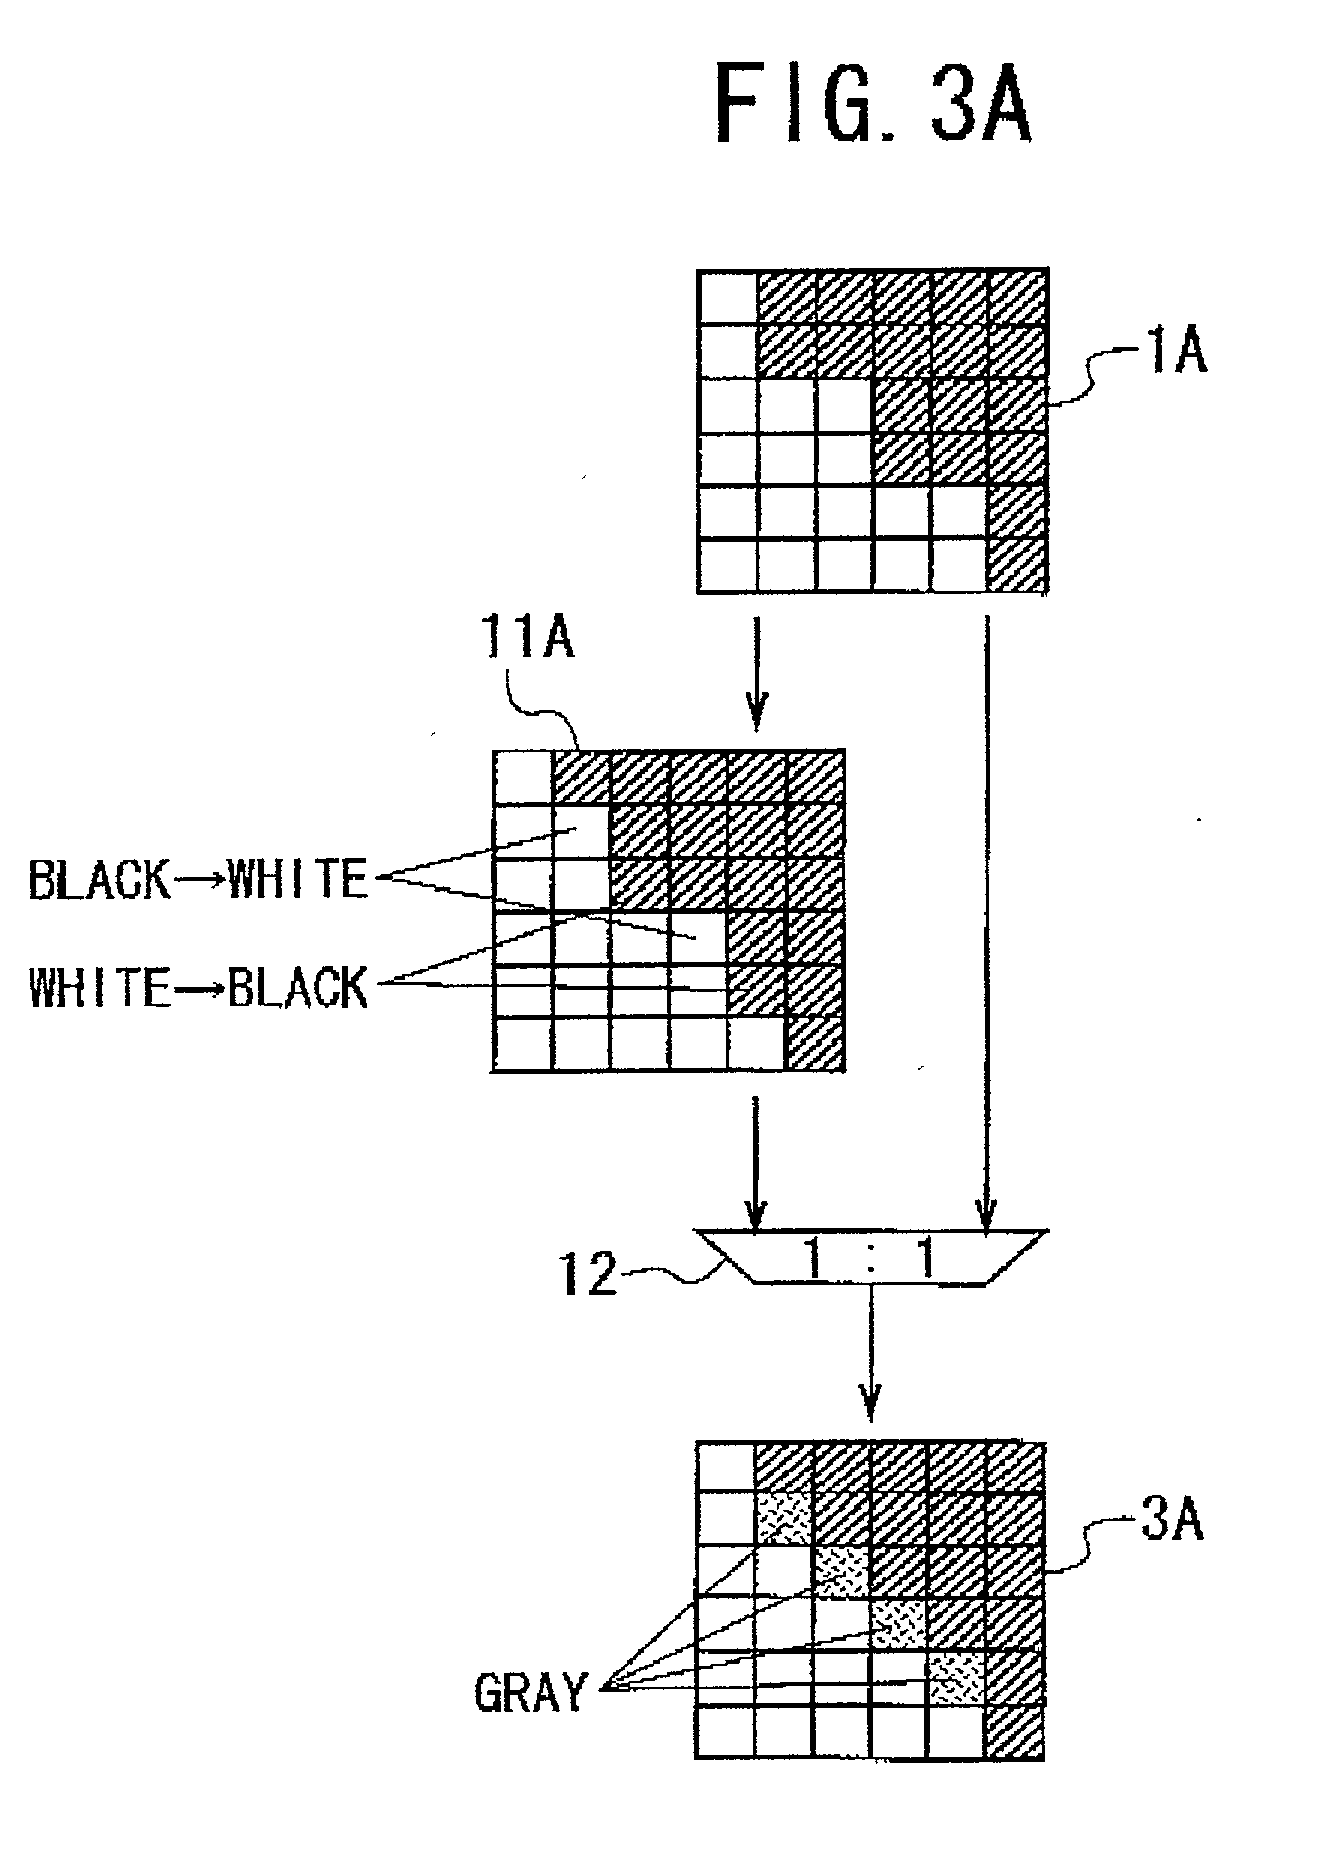 Image processing method and system for interpolation of resolution